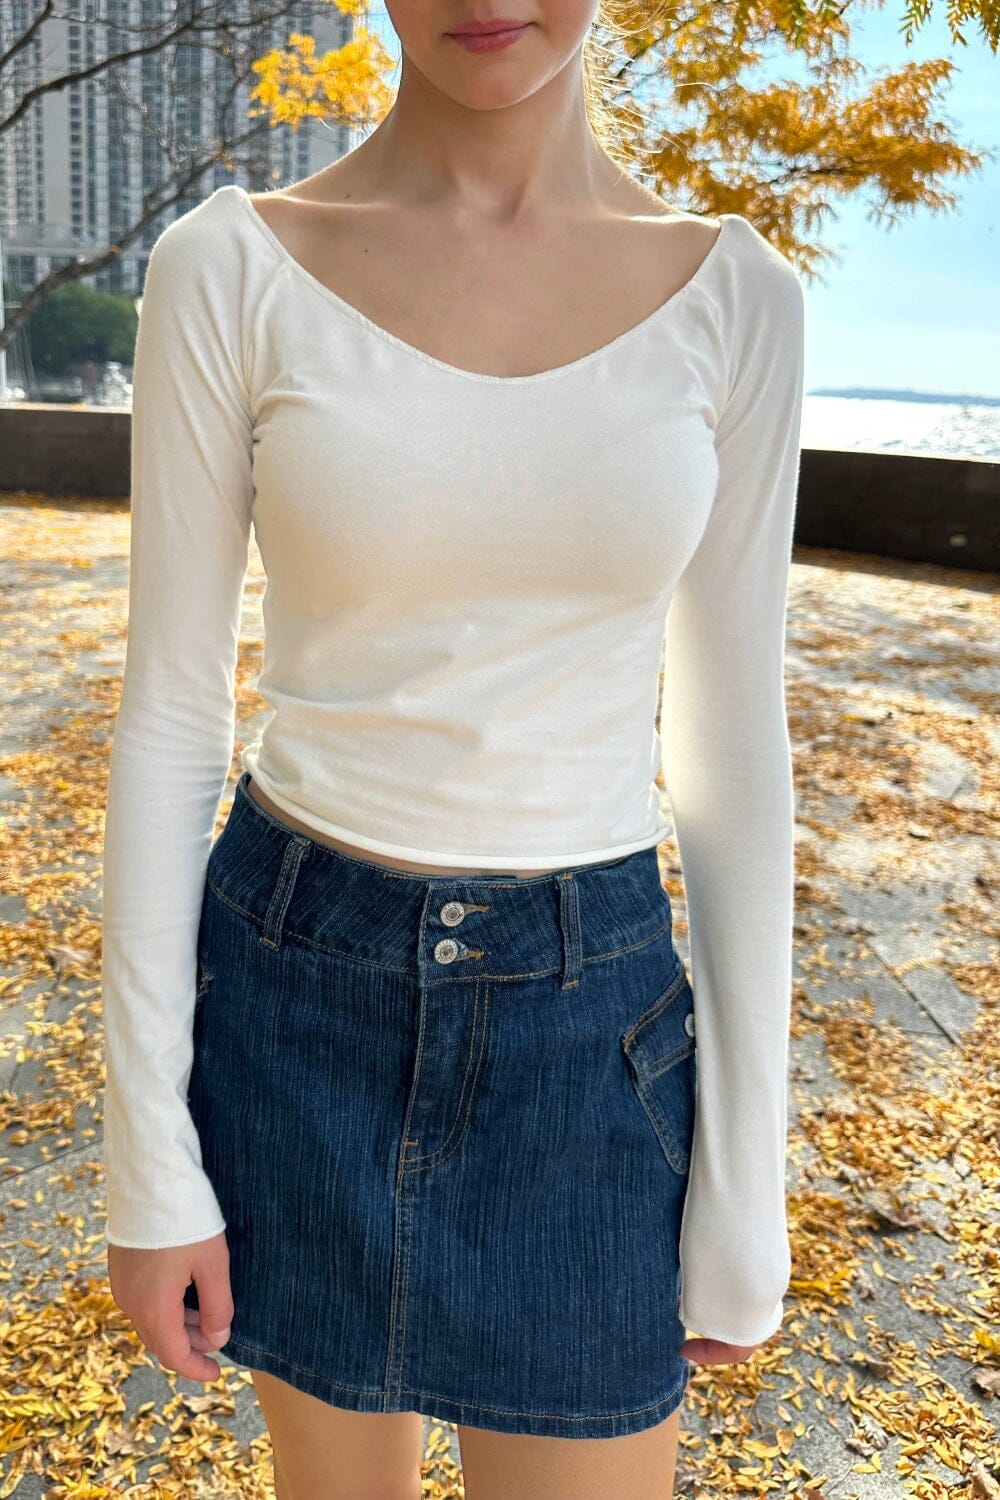 Brandy Melville Mayson Top White - $13 - From Brooklyn